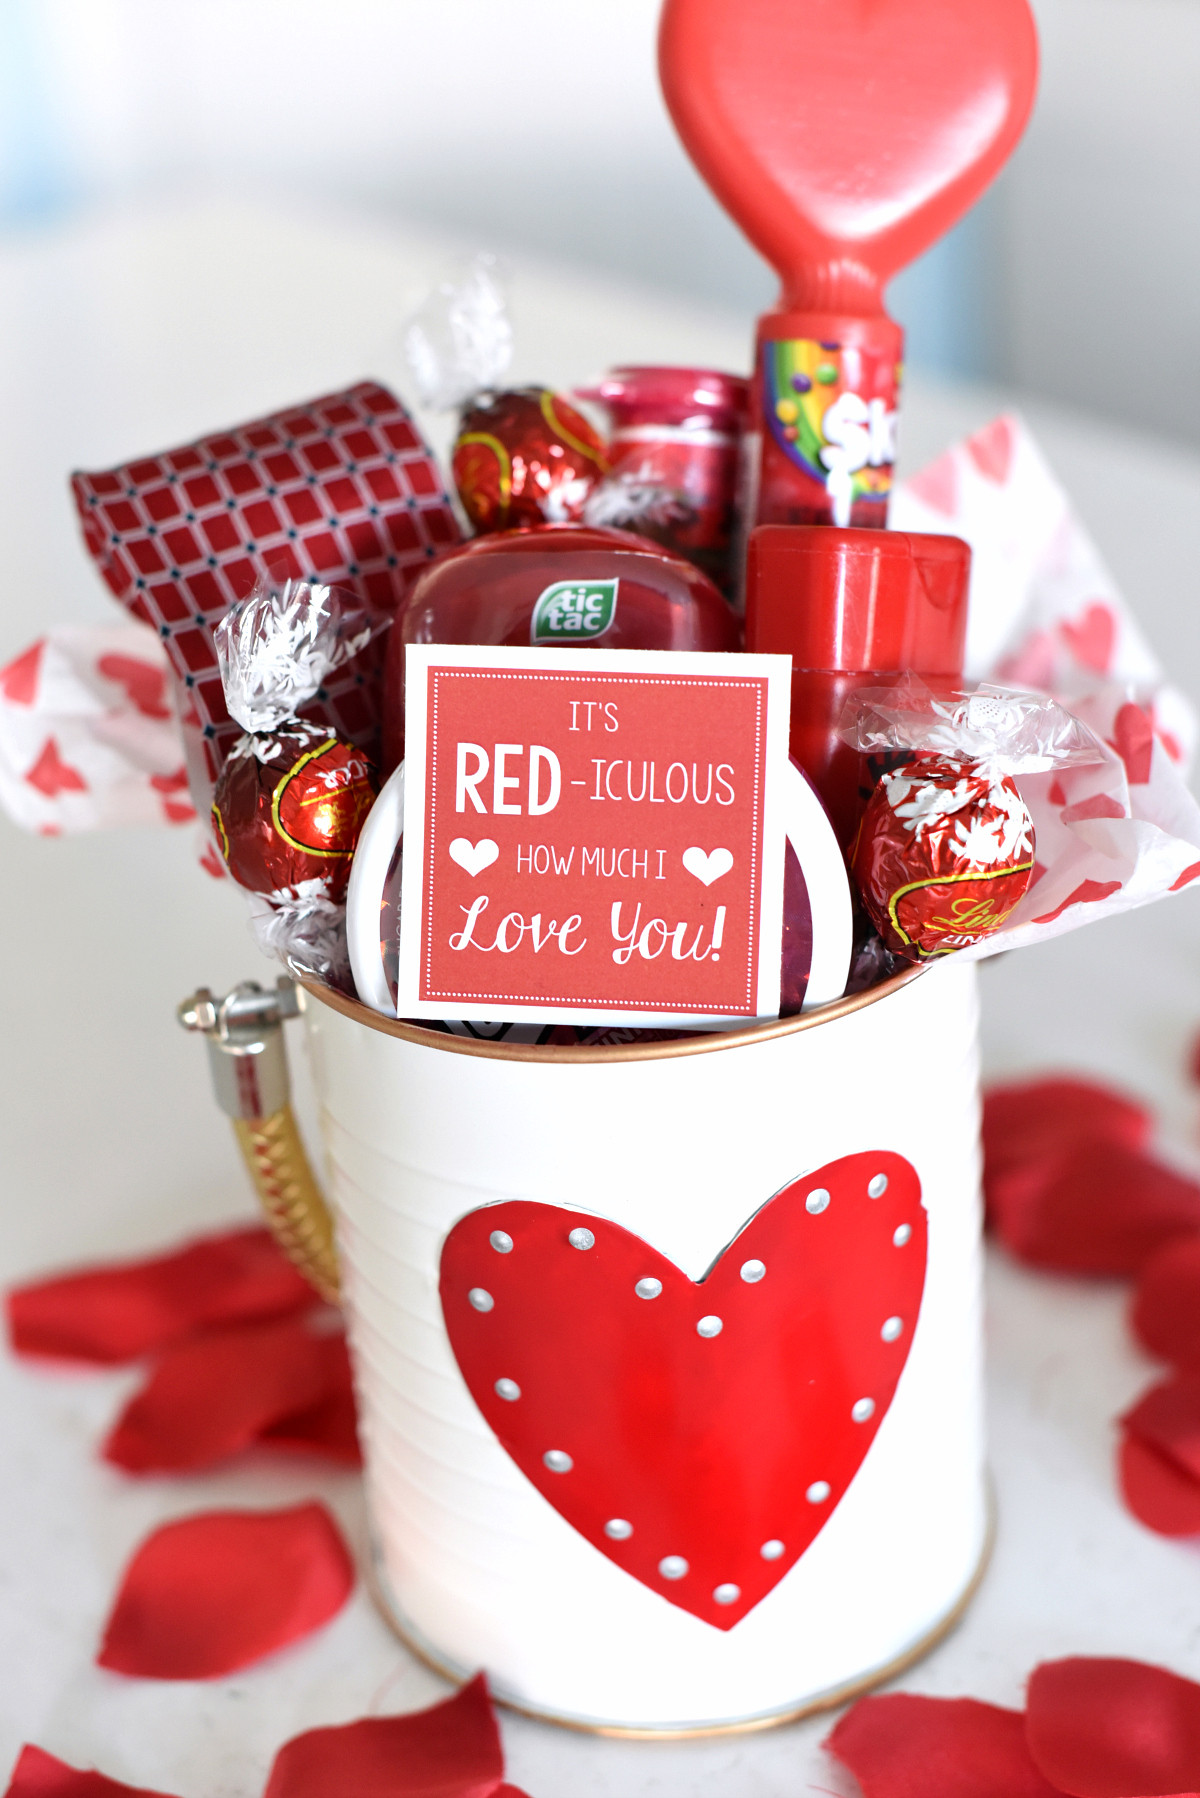 Good Valentine Day Gift Ideas
 Cute Valentine s Day Gift Idea RED iculous Basket